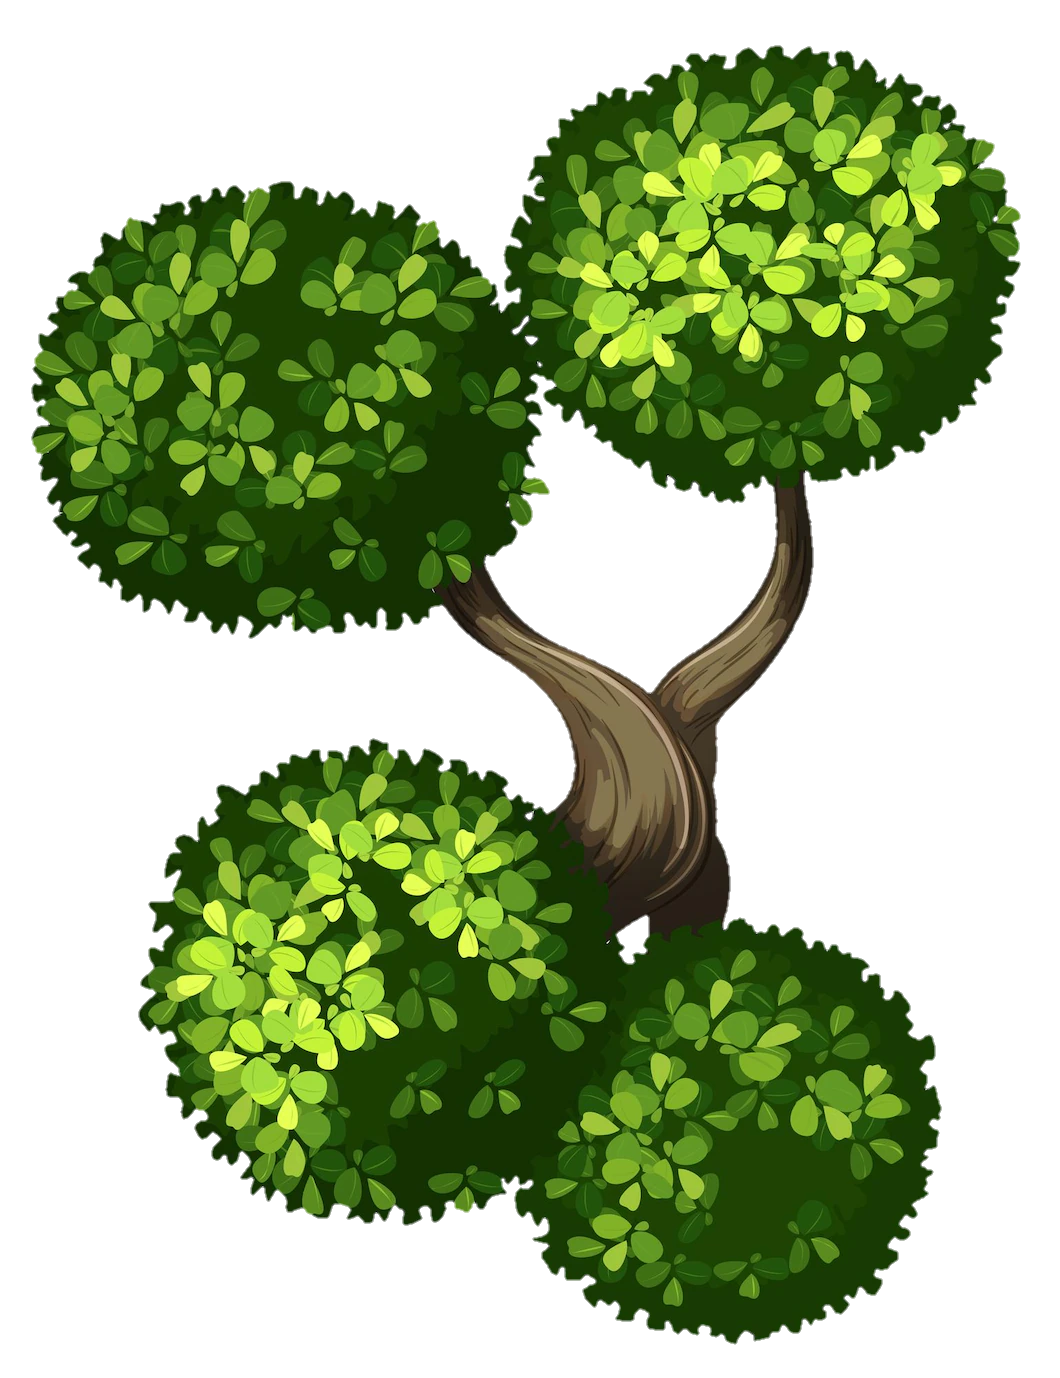 bush-png-from-pngfre-8